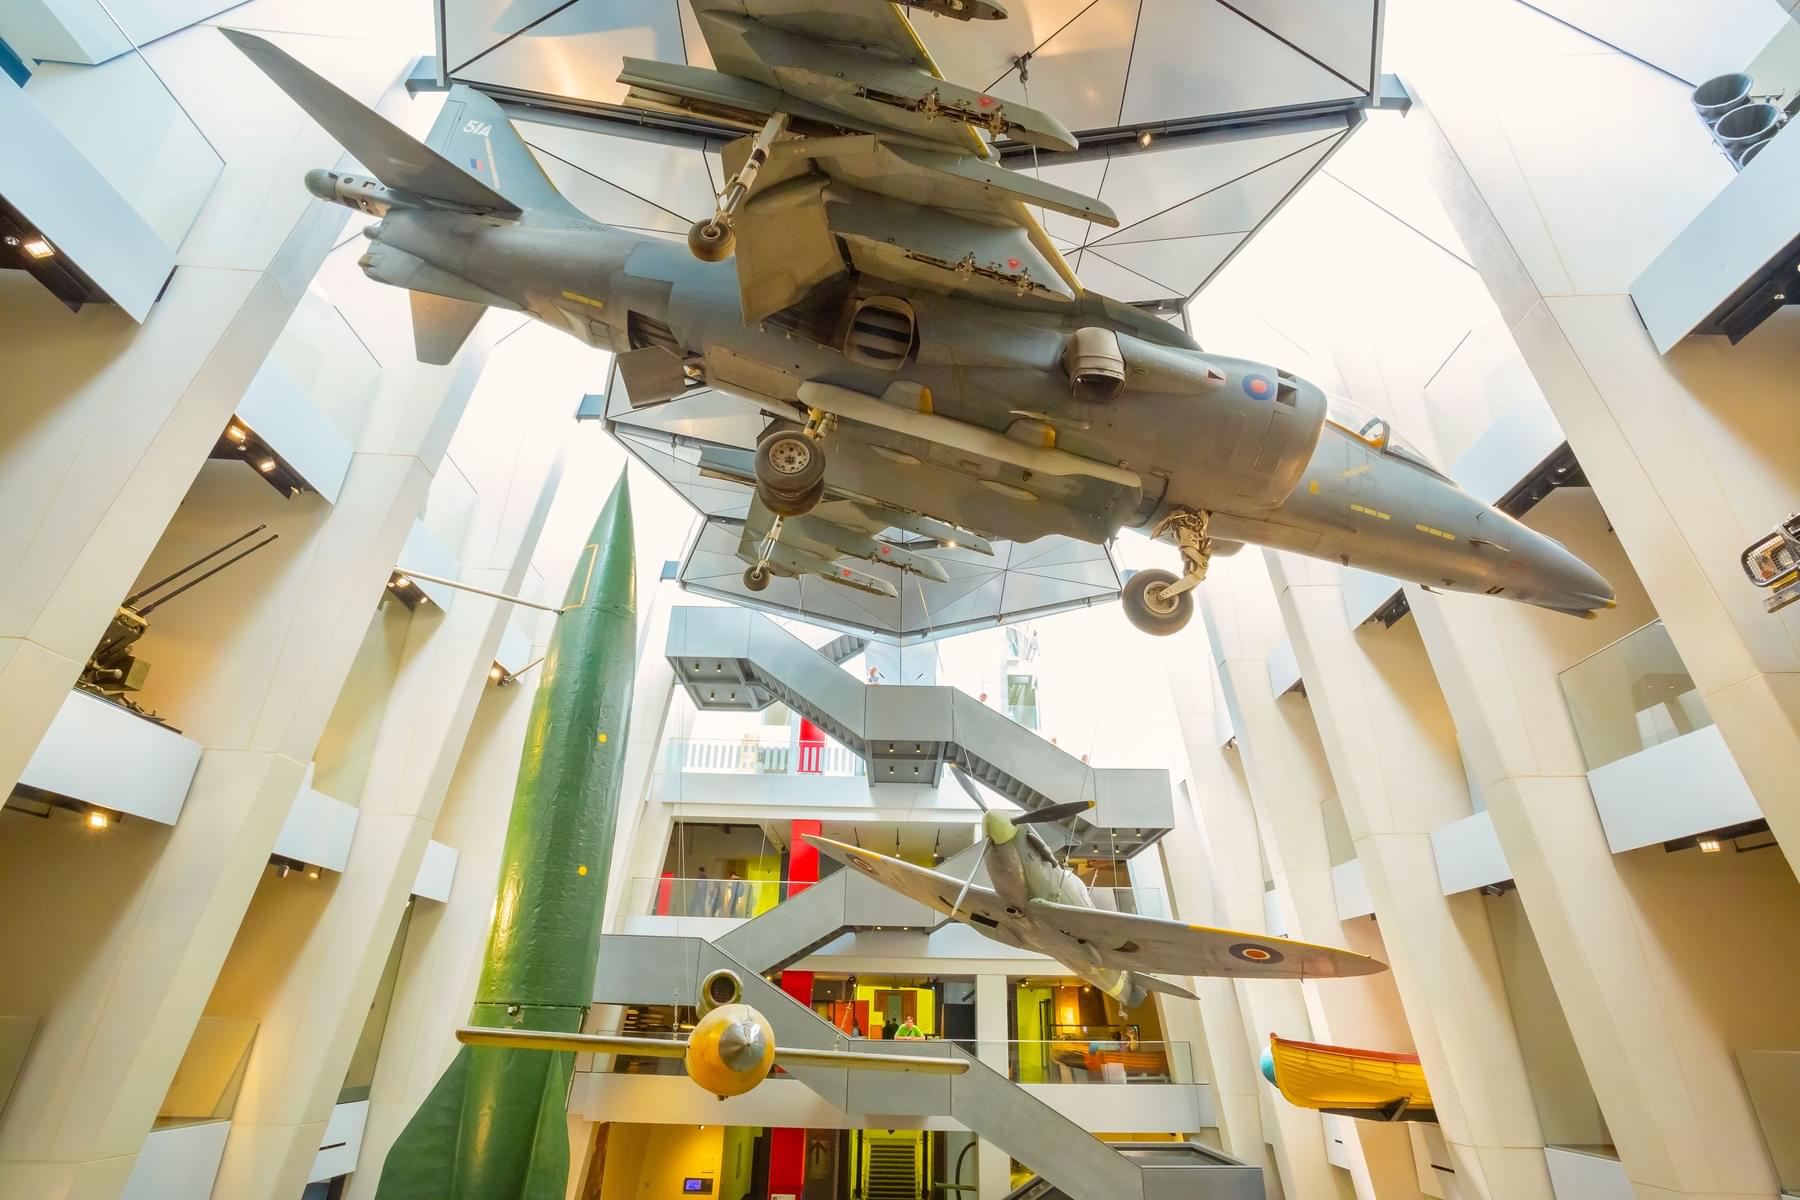 What To Expect In Imperial War Museum